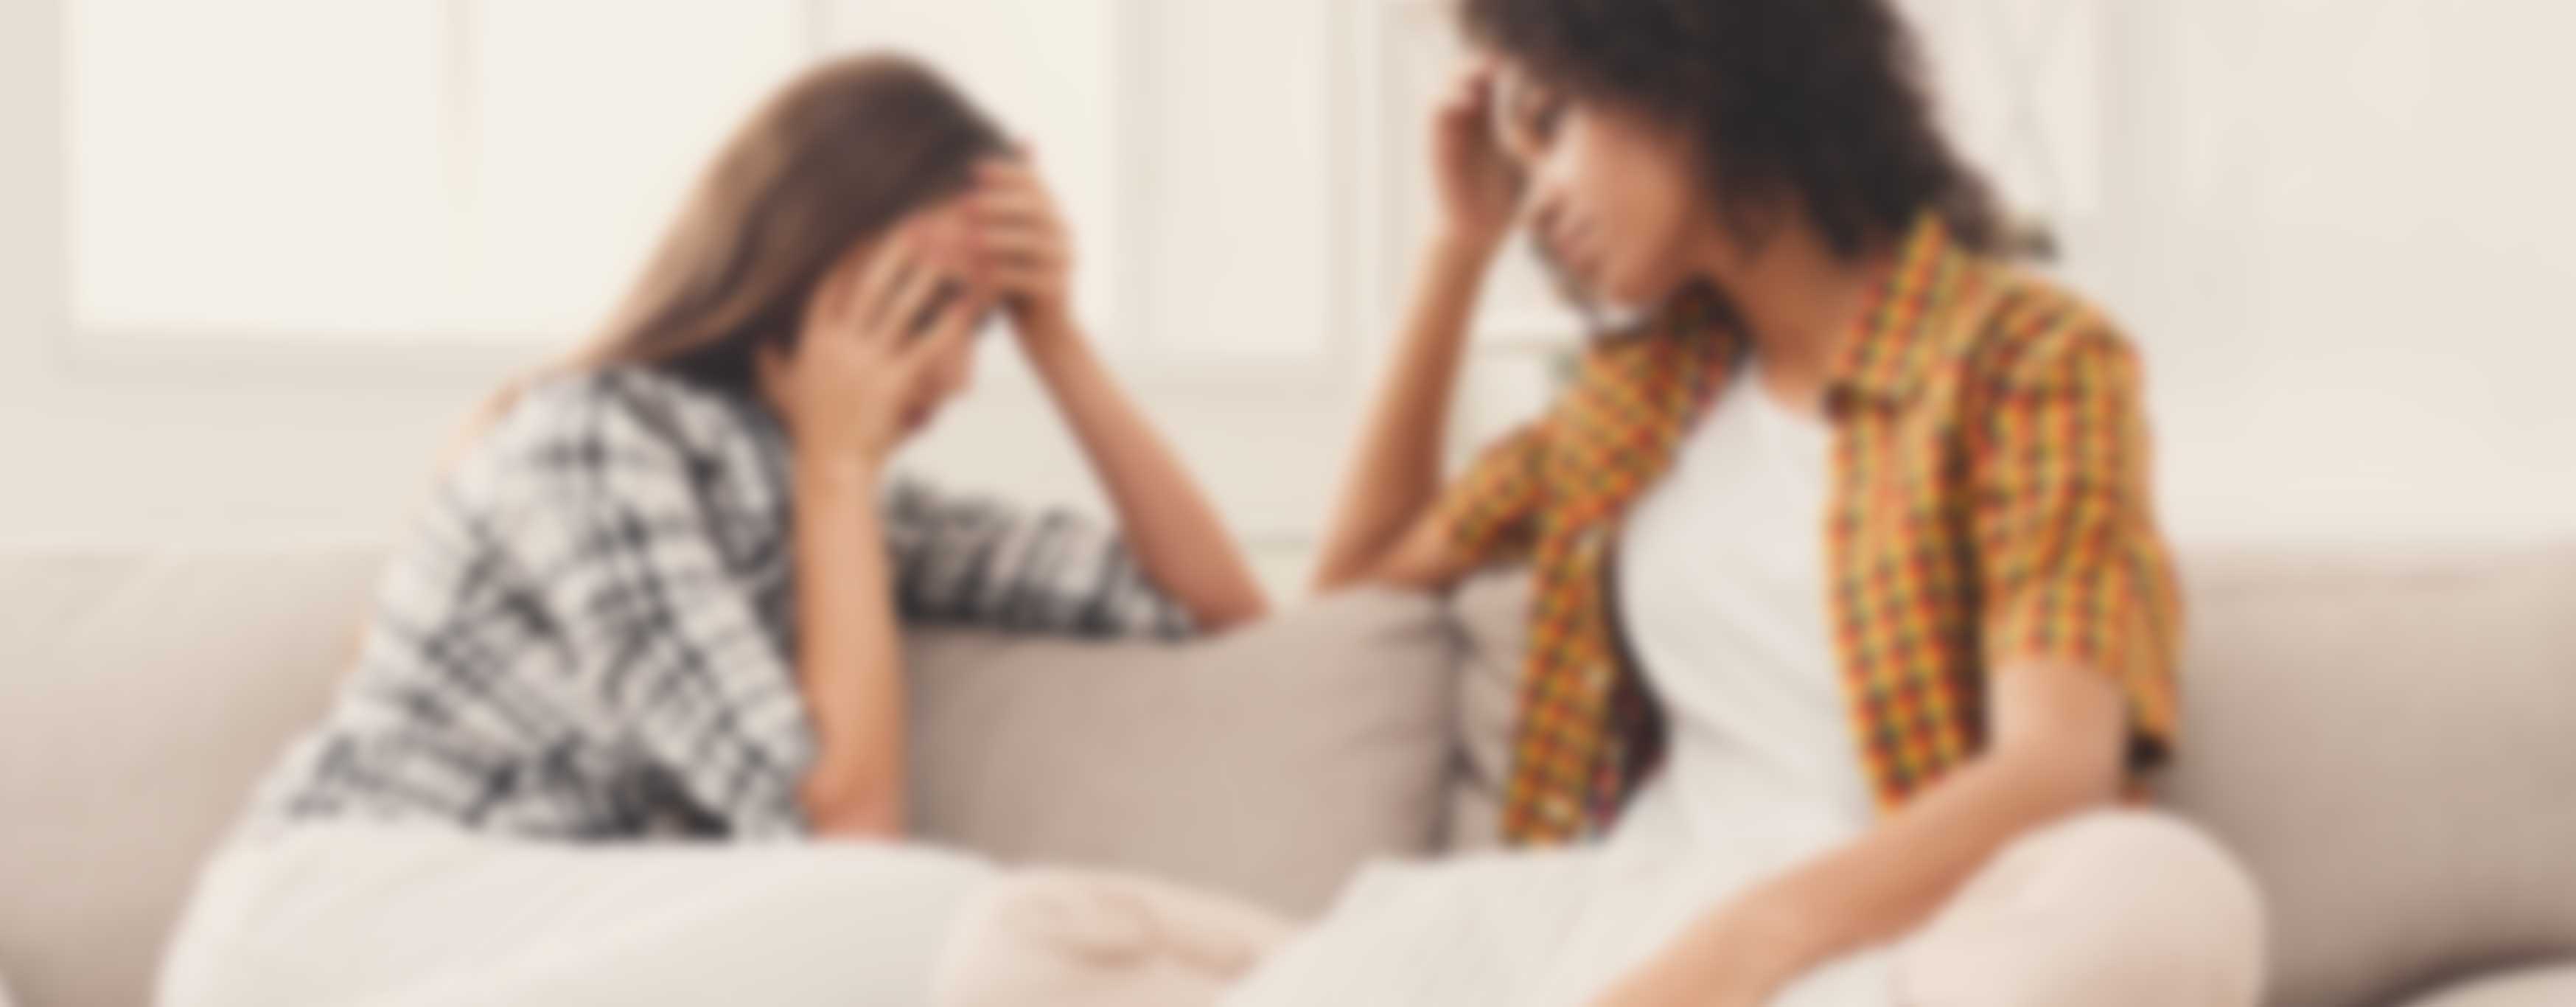 Why Lesbian and Bisexual Women are Reluctant to Get Help for Mental Health 